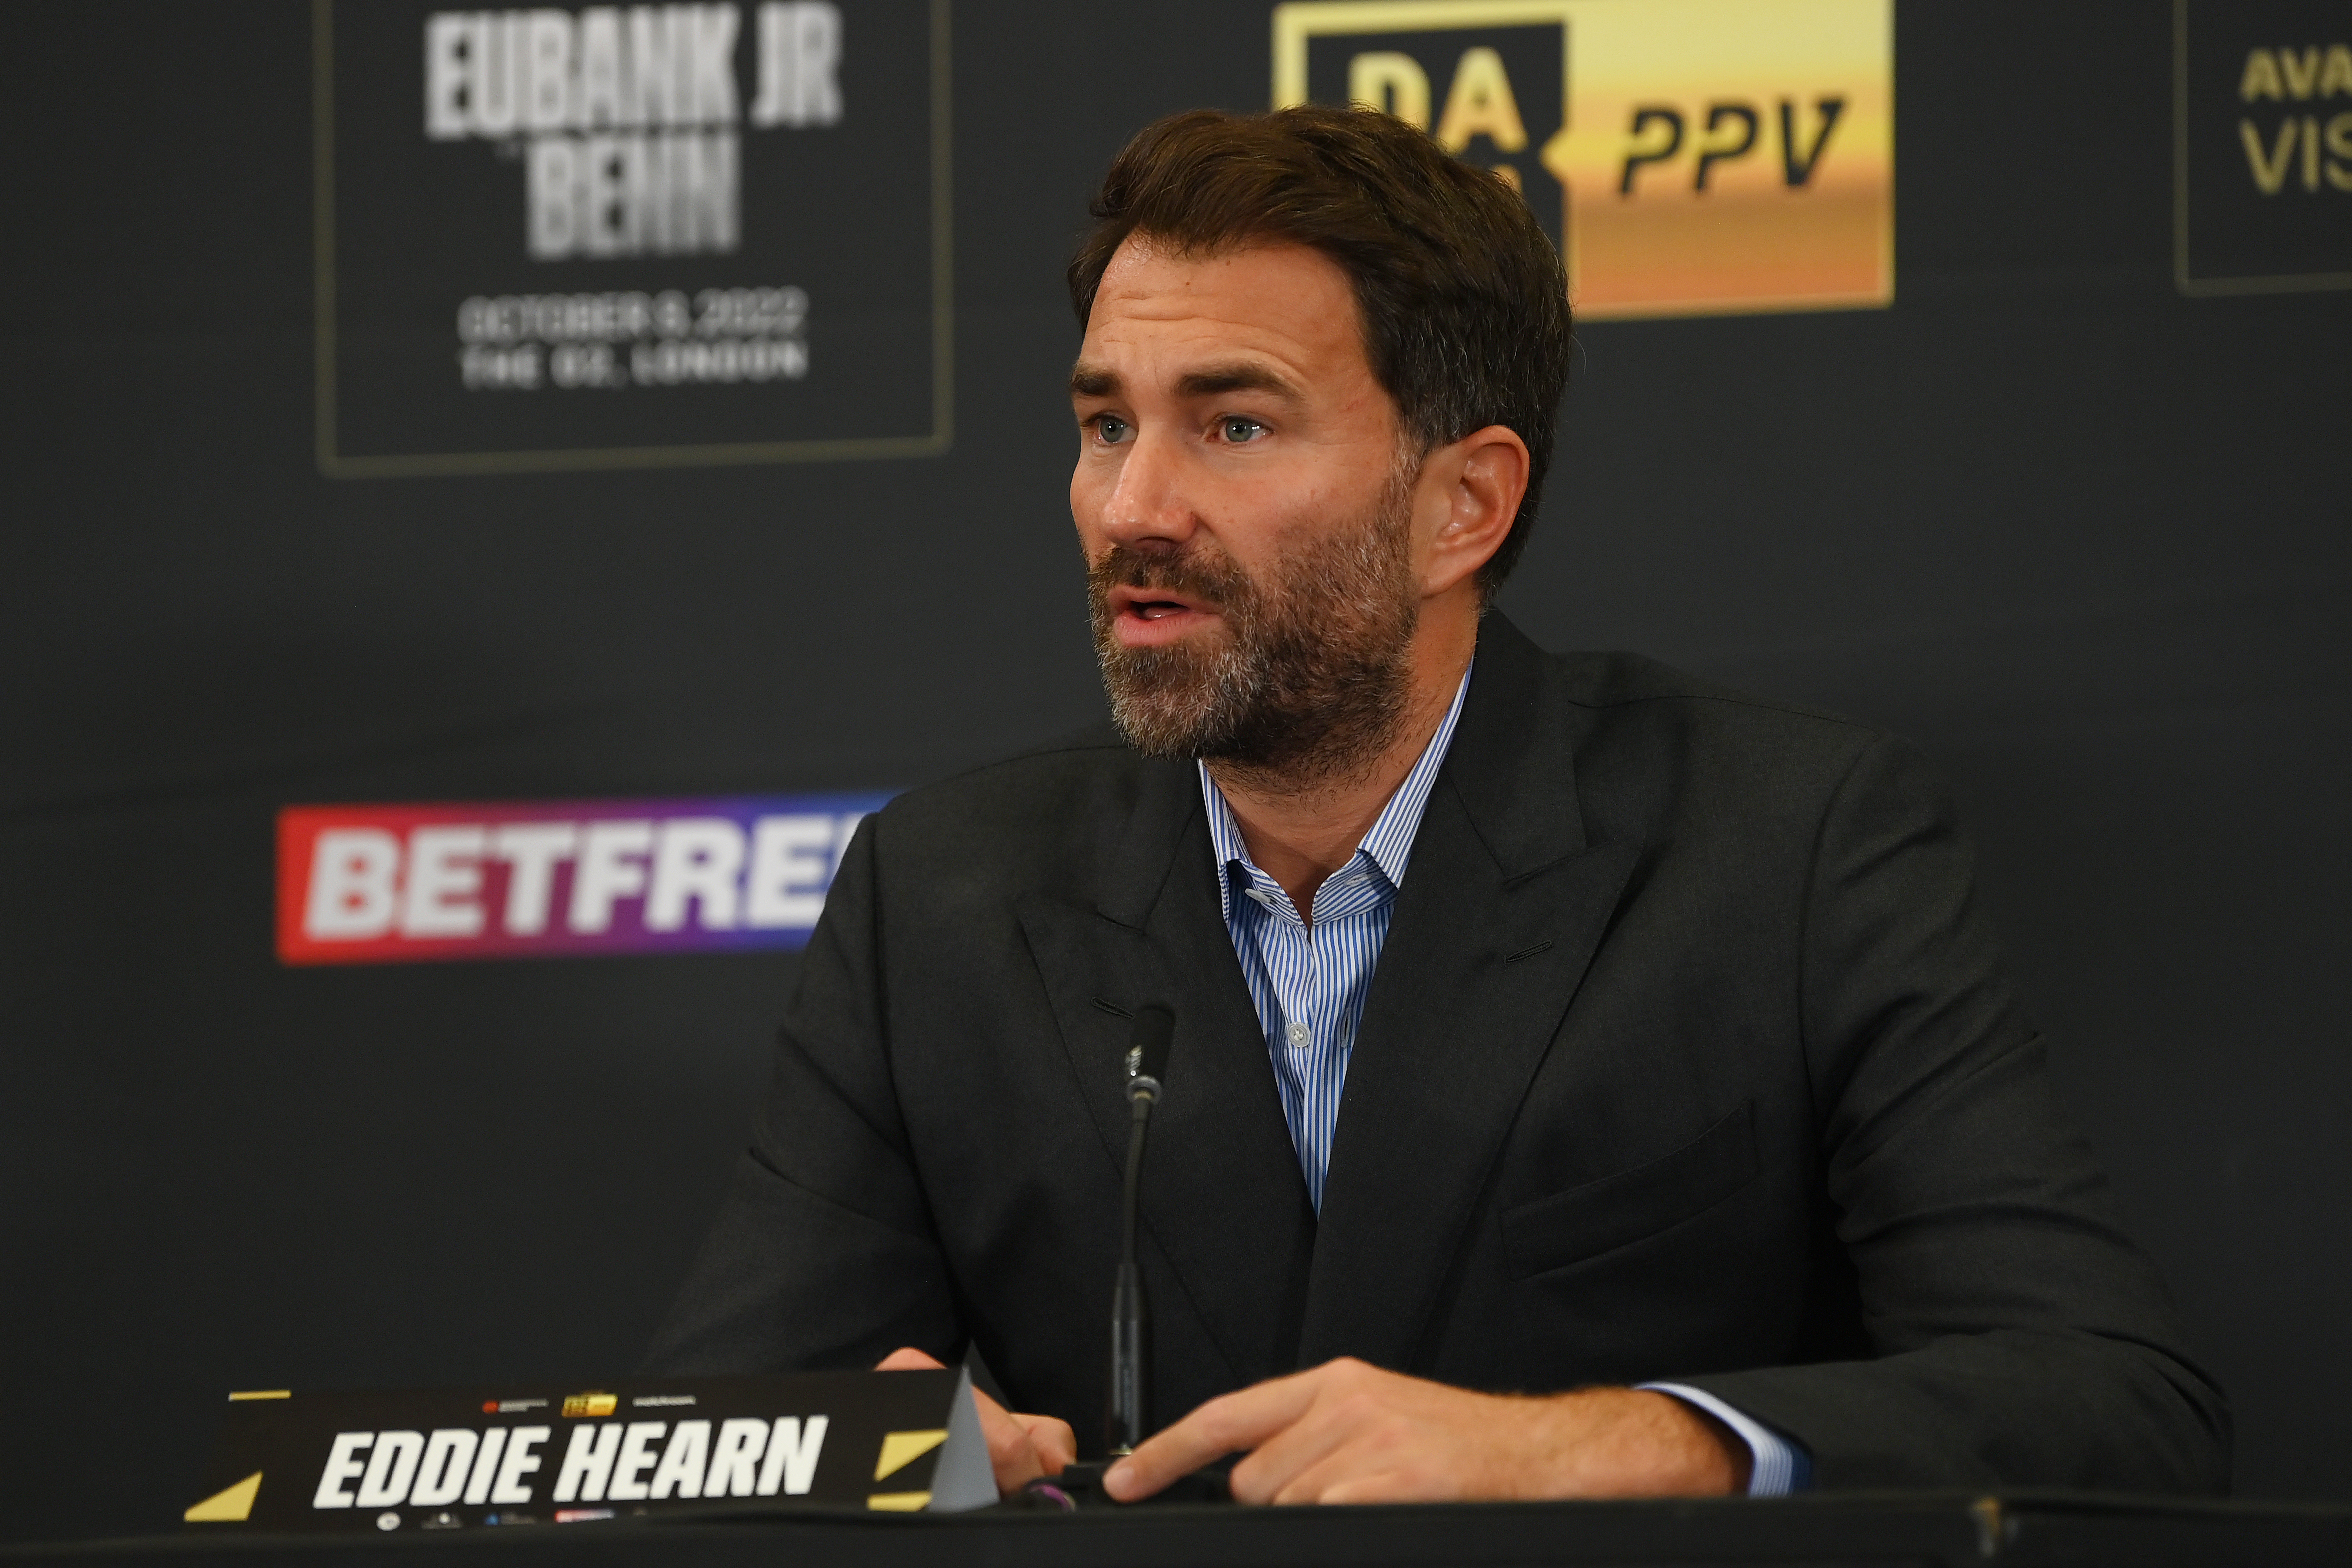 Eddie Hearn shares his perspective on the future of the lightweight division.